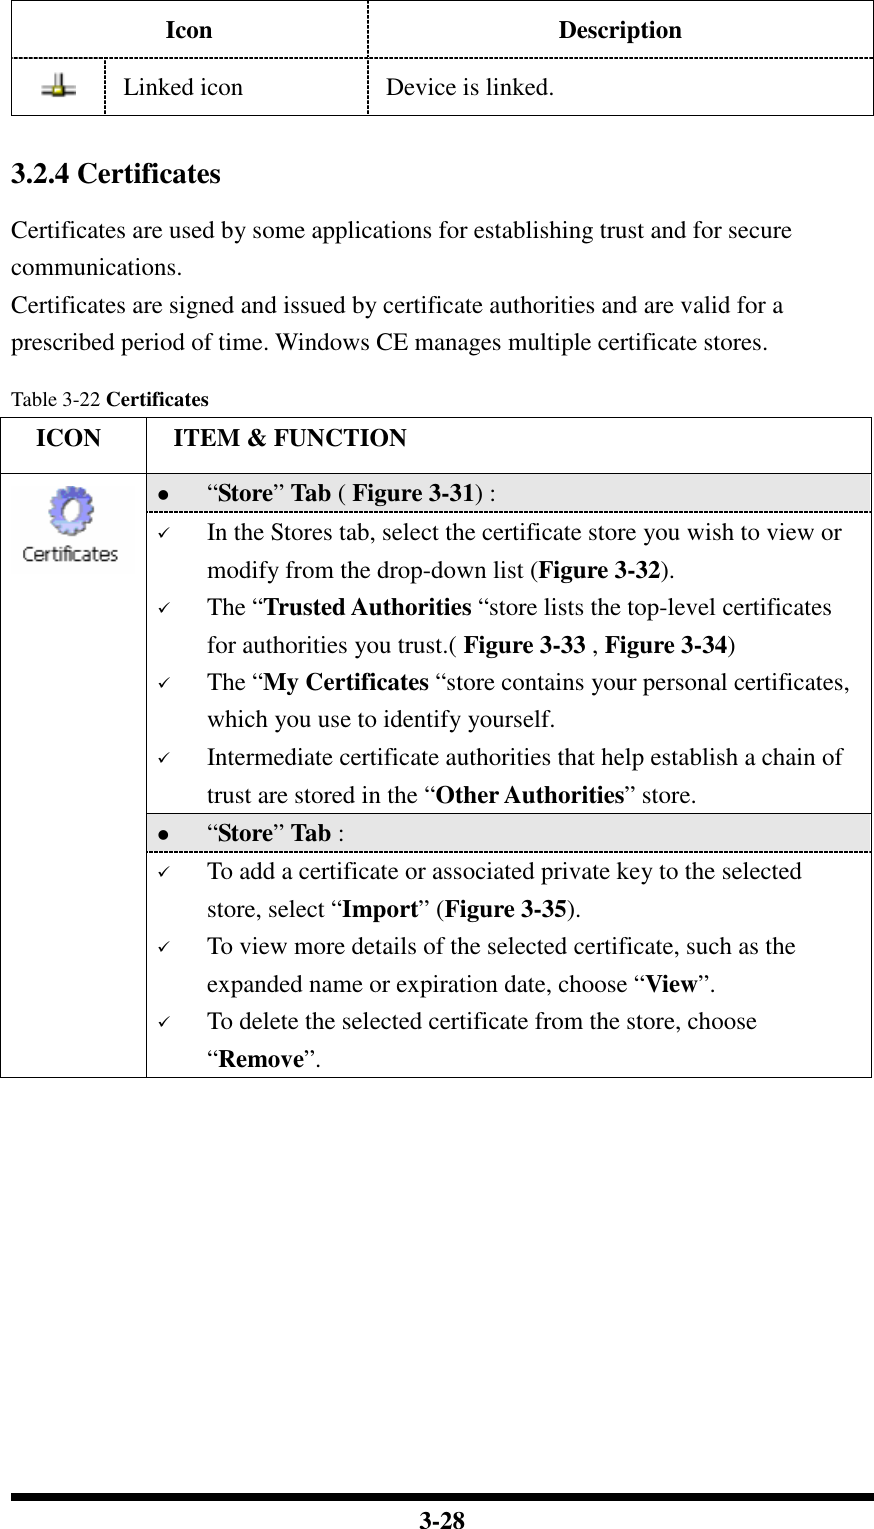  3-28 Icon Description  Linked icon  Device is linked.   3.2.4 Certificates  Certificates are used by some applications for establishing trust and for secure communications. Certificates are signed and issued by certificate authorities and are valid for a prescribed period of time. Windows CE manages multiple certificate stores.  Table 3-22 Certificates     ICON  ITEM &amp; FUNCTION  “Store” Tab ( Figure 3-31) :   In the Stores tab, select the certificate store you wish to view or modify from the drop-down list (Figure 3-32).   The “Trusted Authorities “store lists the top-level certificates for authorities you trust.( Figure 3-33 , Figure 3-34)   The “My Certificates “store contains your personal certificates, which you use to identify yourself.   Intermediate certificate authorities that help establish a chain of trust are stored in the “Other Authorities” store.  “Store” Tab :    To add a certificate or associated private key to the selected store, select “Import” (Figure 3-35).  To view more details of the selected certificate, such as the expanded name or expiration date, choose “View”.  To delete the selected certificate from the store, choose “Remove”.   